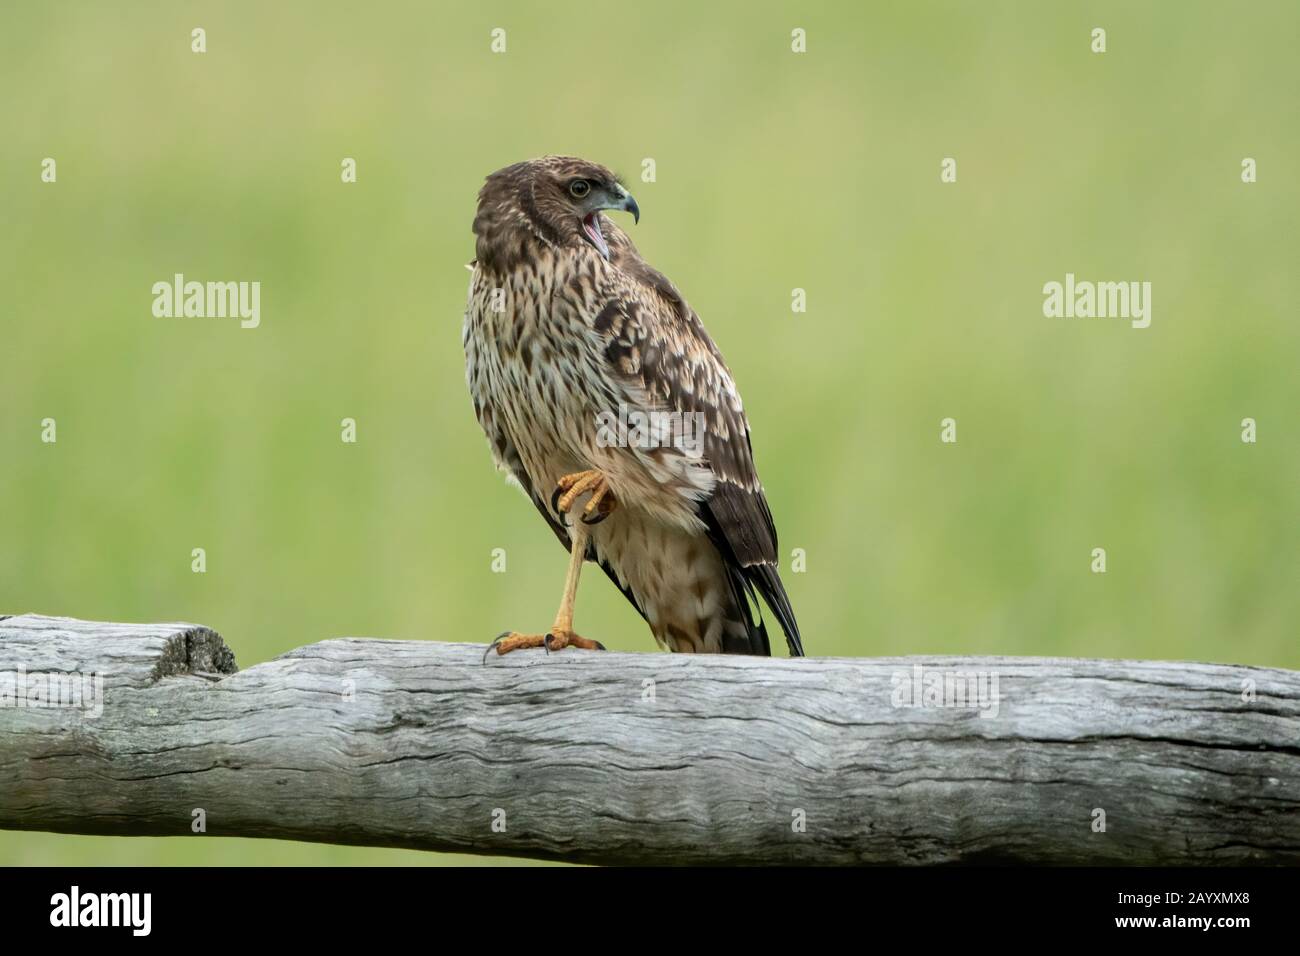 spotted harrier, Circus assimilis, young bird perched on fencepost, Atherton Tablelands, Queensland, Australia 9 January 2020 Stock Photo